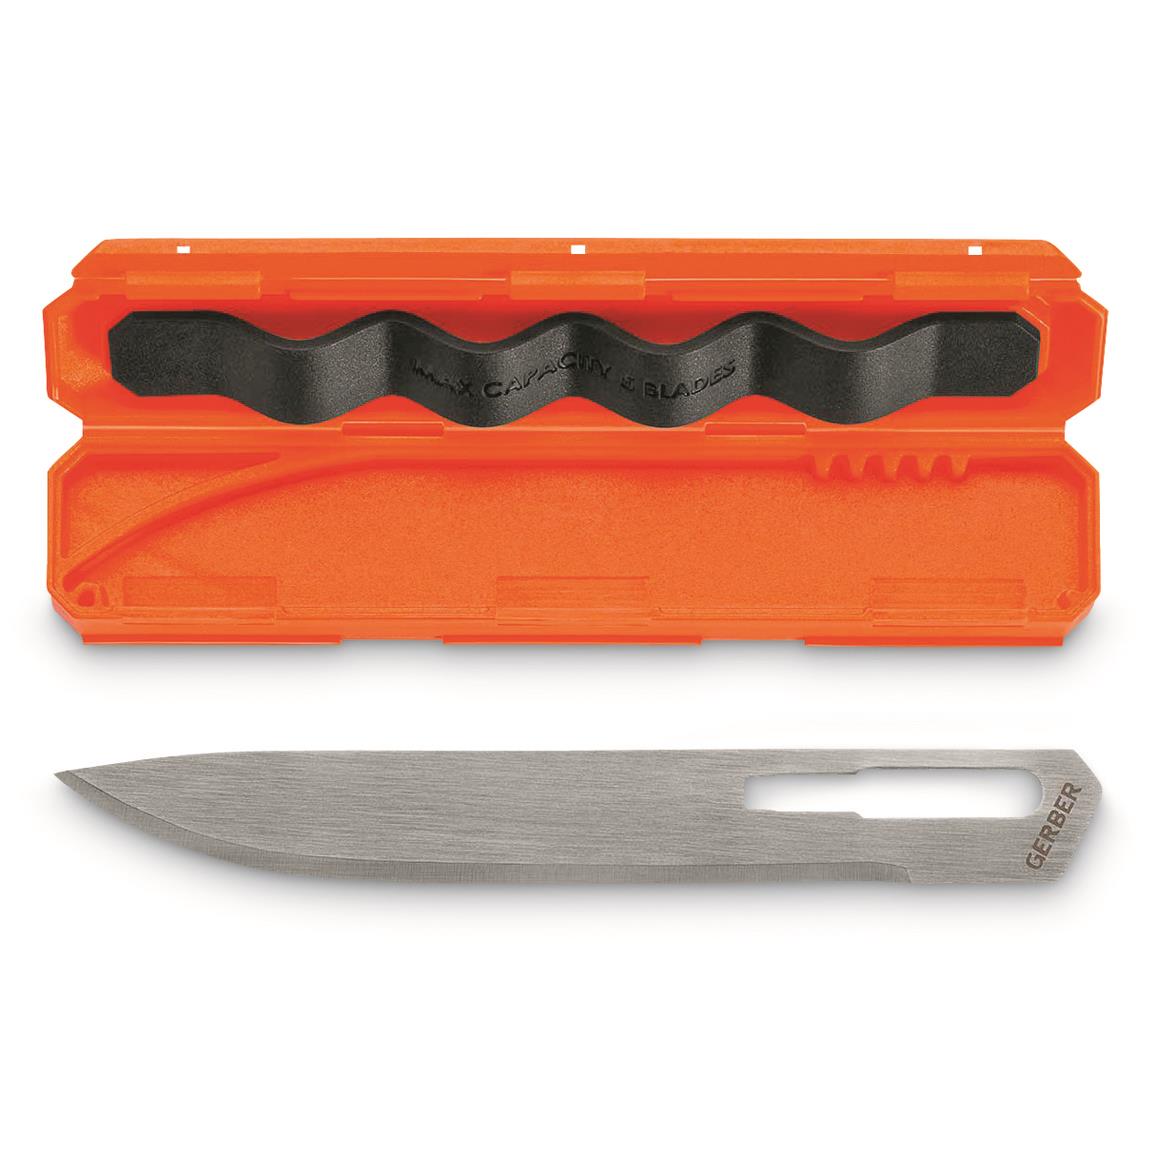 Gerber Vital Big Game Replacement Blades with Case, Drop Point